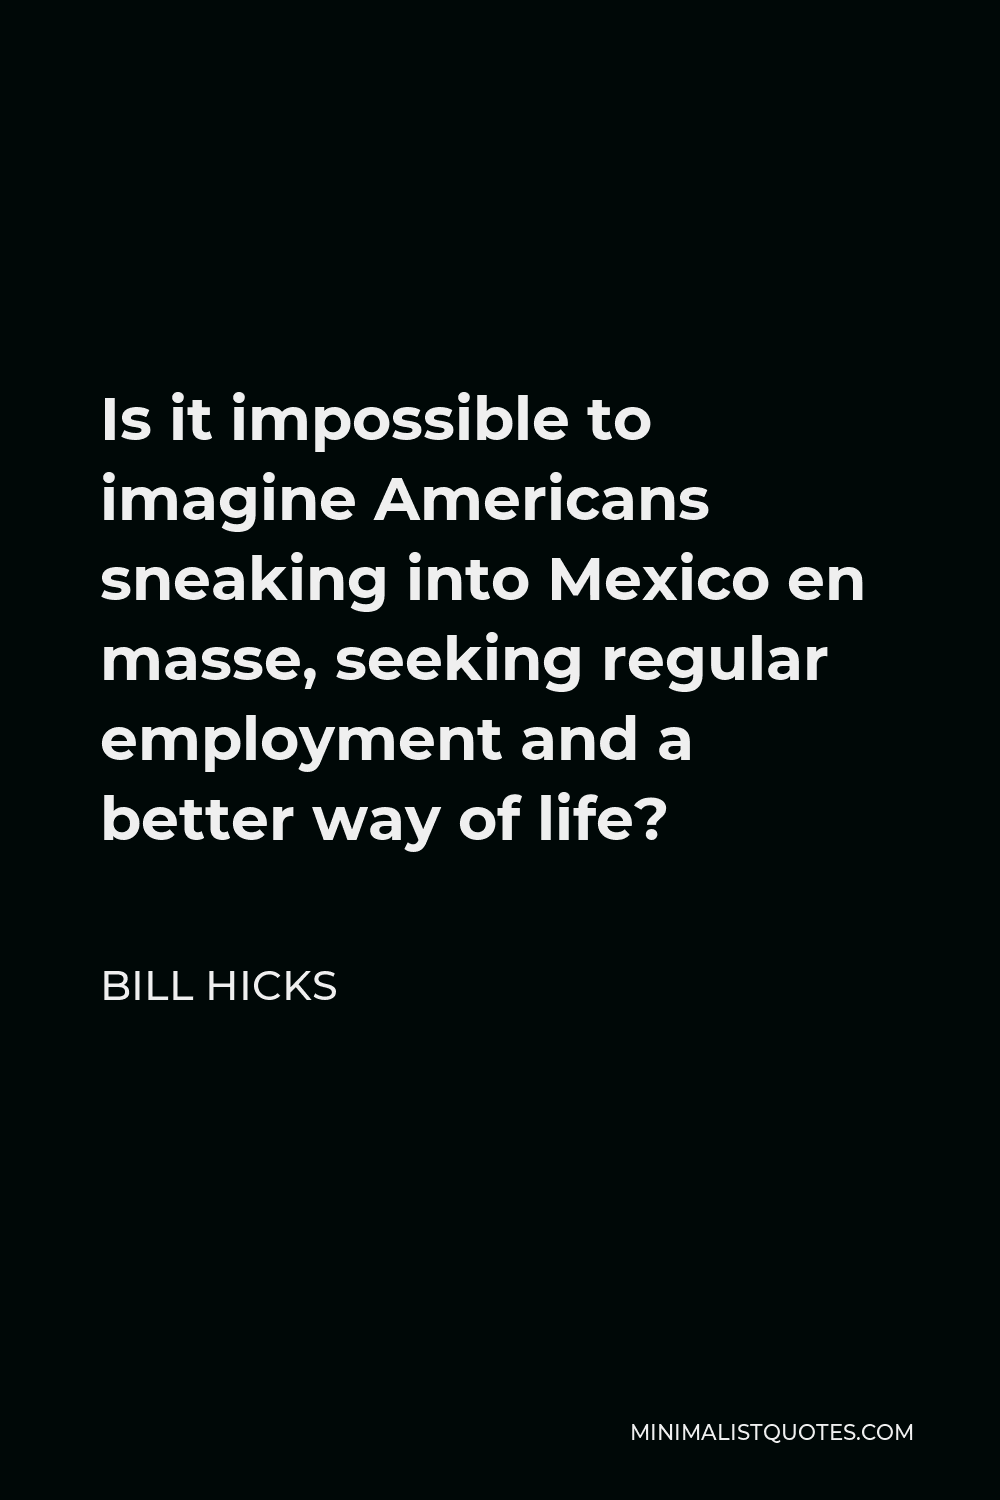 Bill Hicks Quote - Is it impossible to imagine Americans sneaking into Mexico en masse, seeking regular employment and a better way of life?